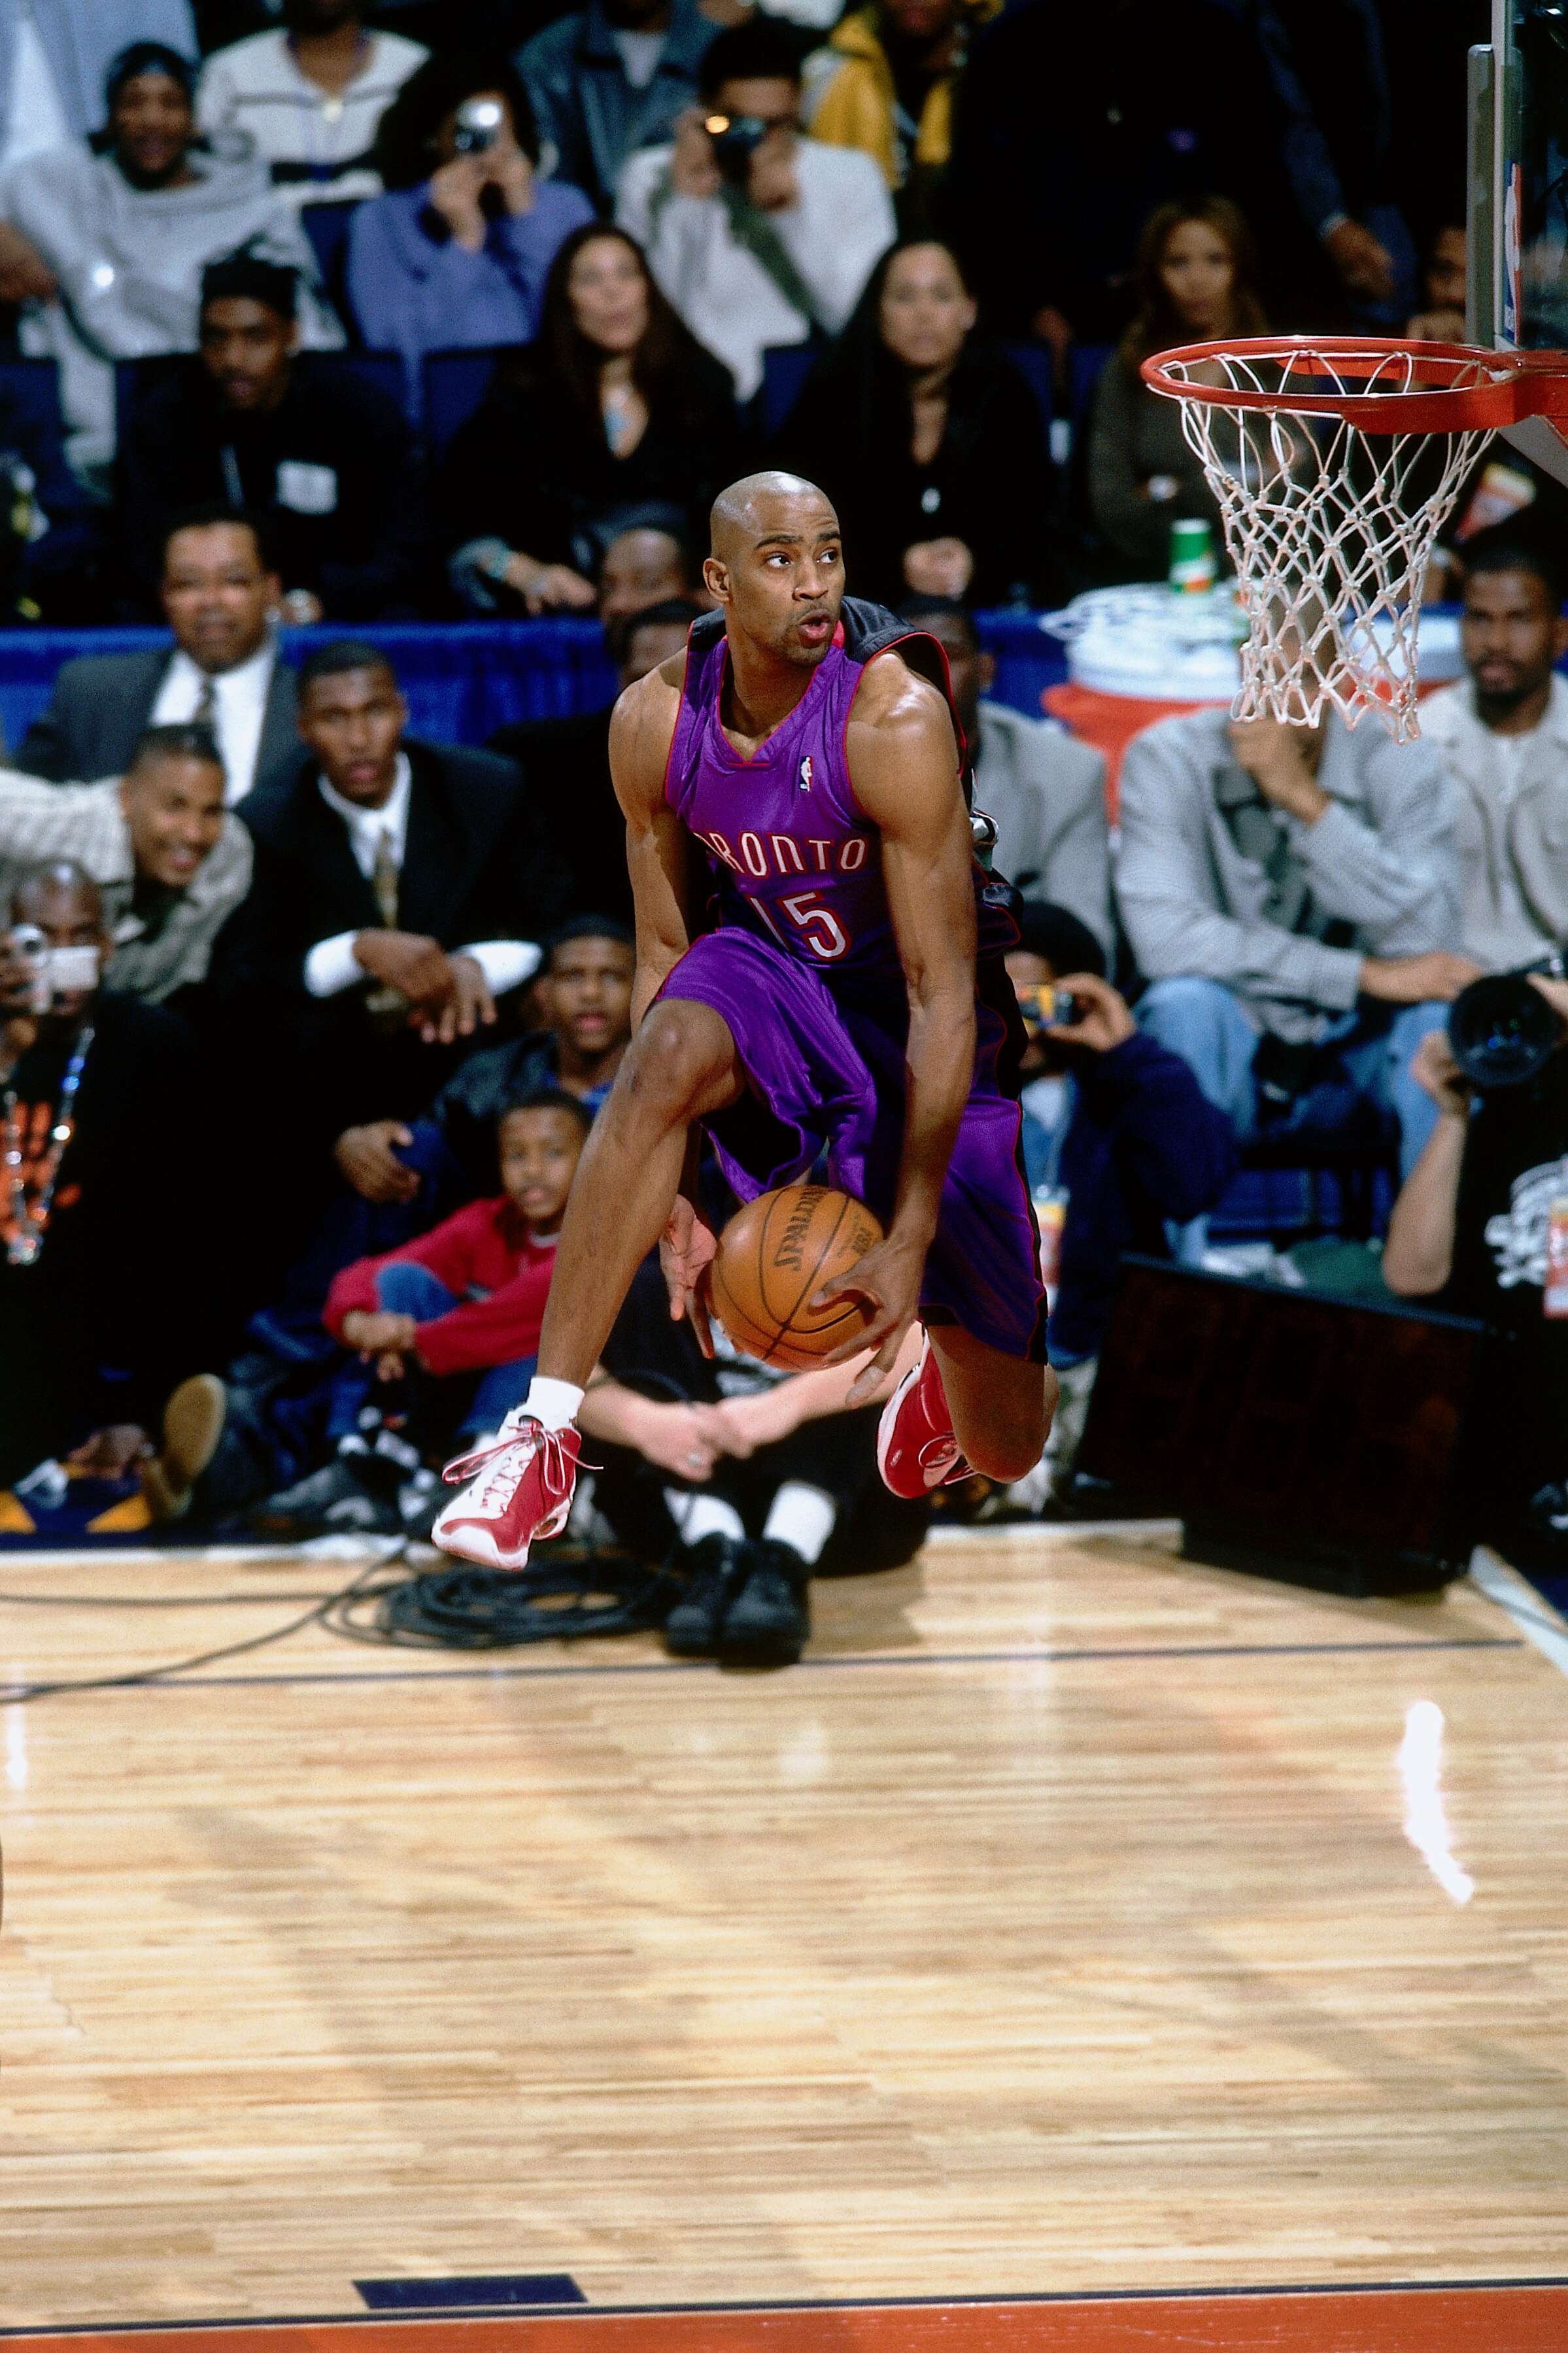 The best photos from Vince Carter’s legendary dunk contest performance